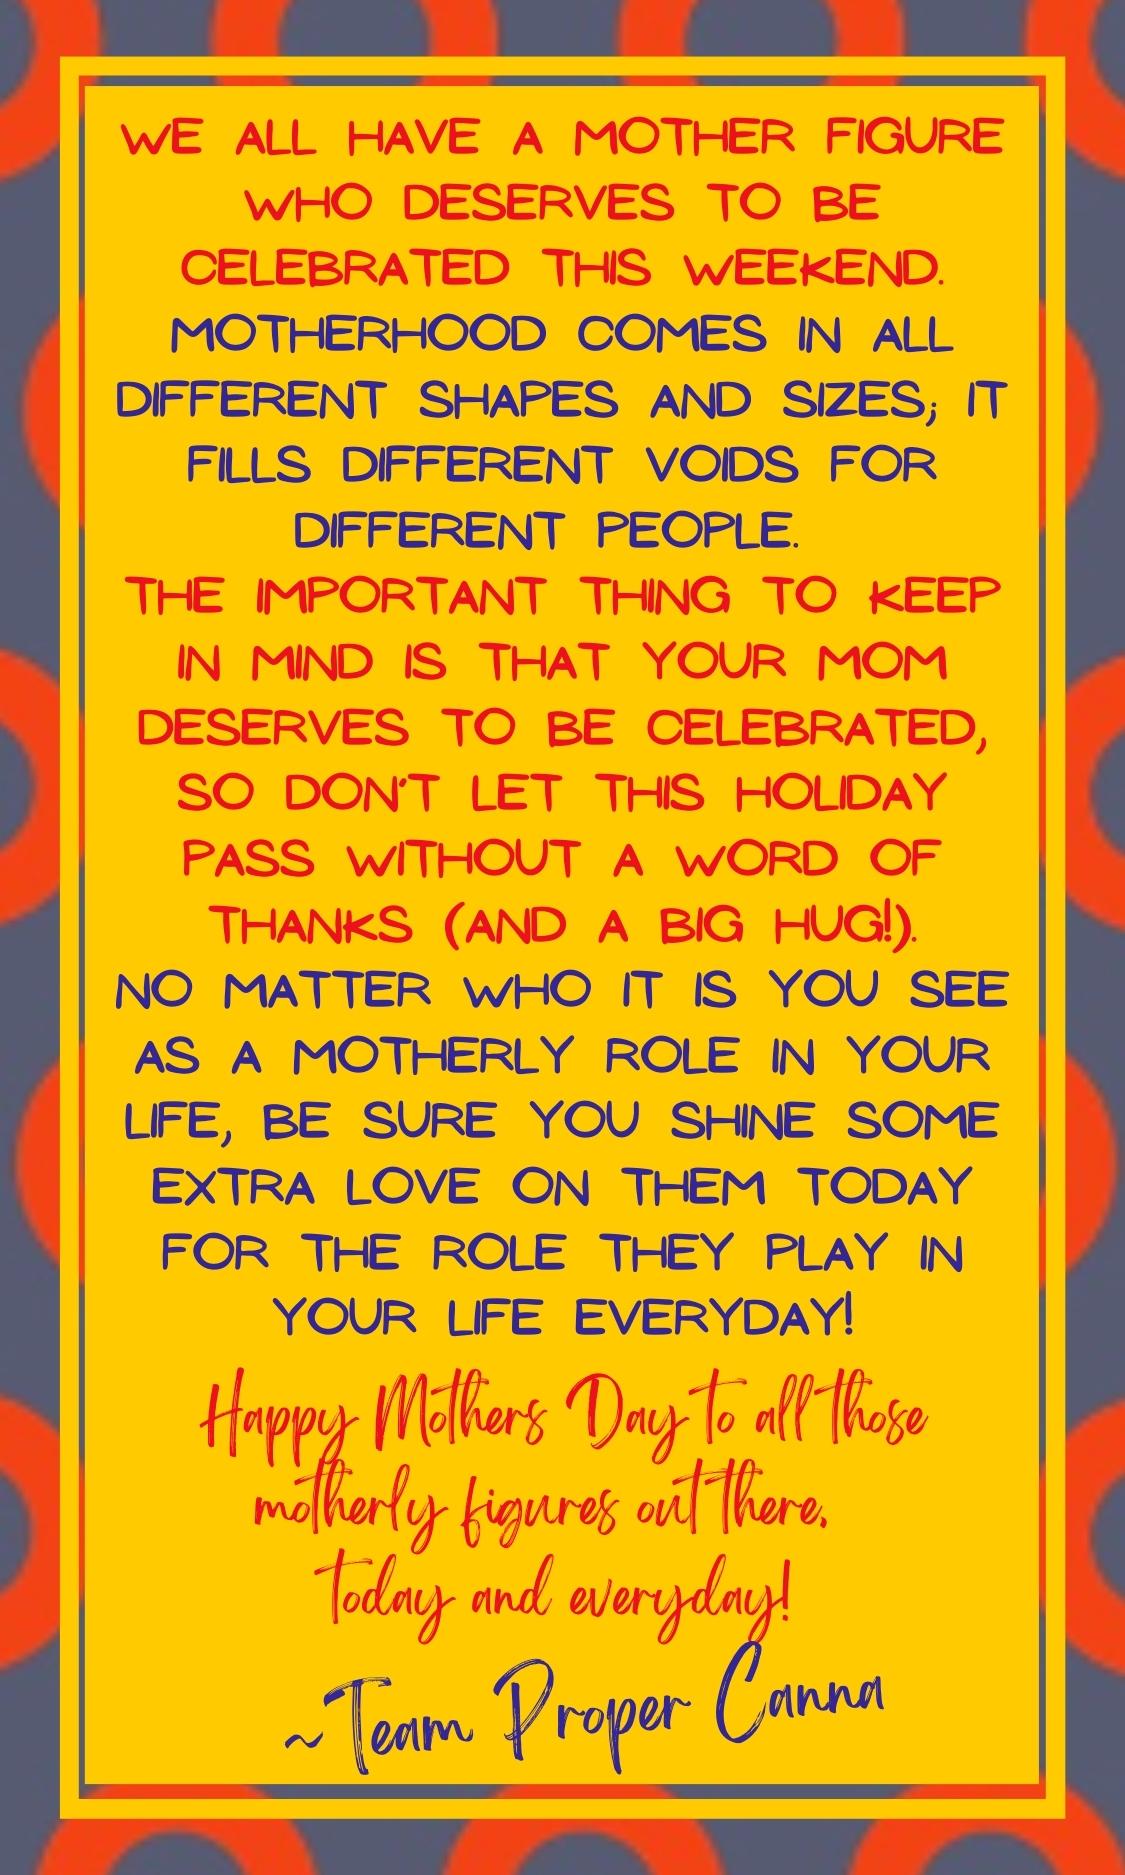 pcn-mothers-day-3